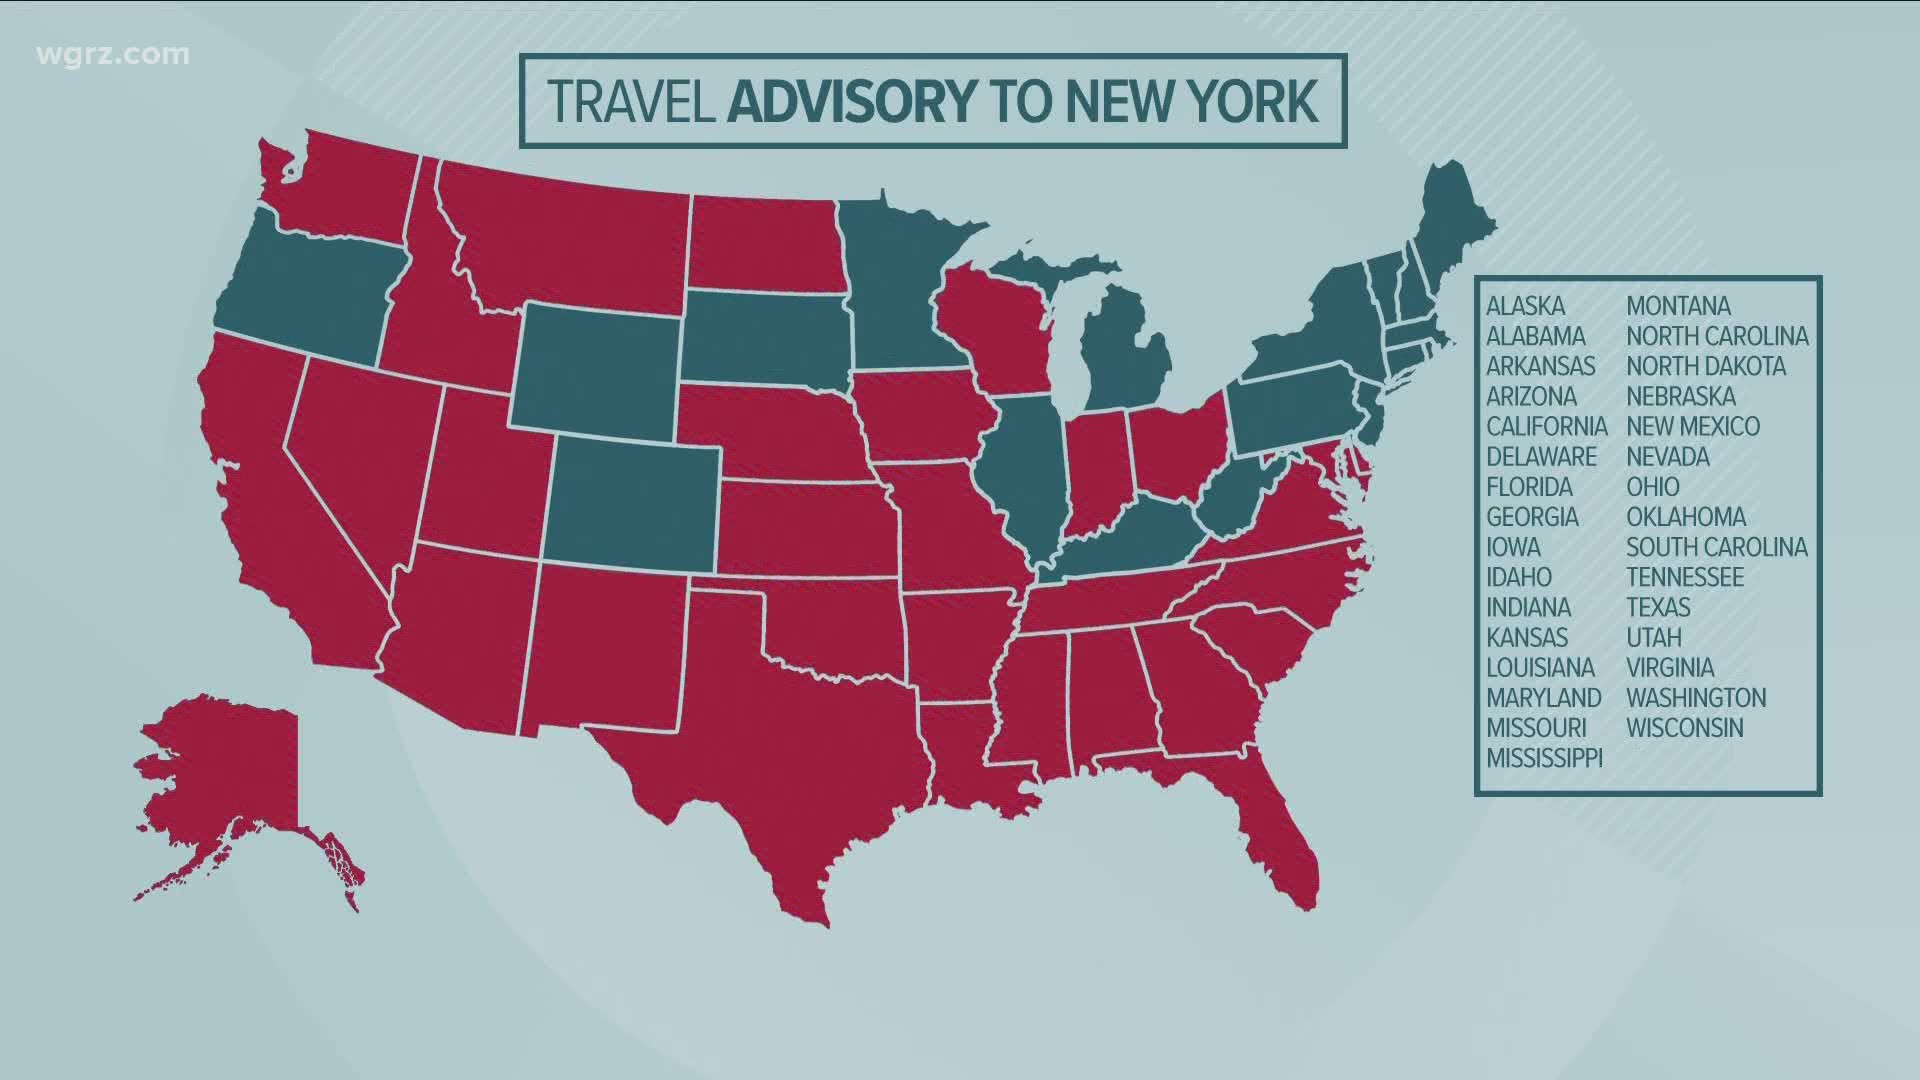 We get your questions answered  about travel restriction